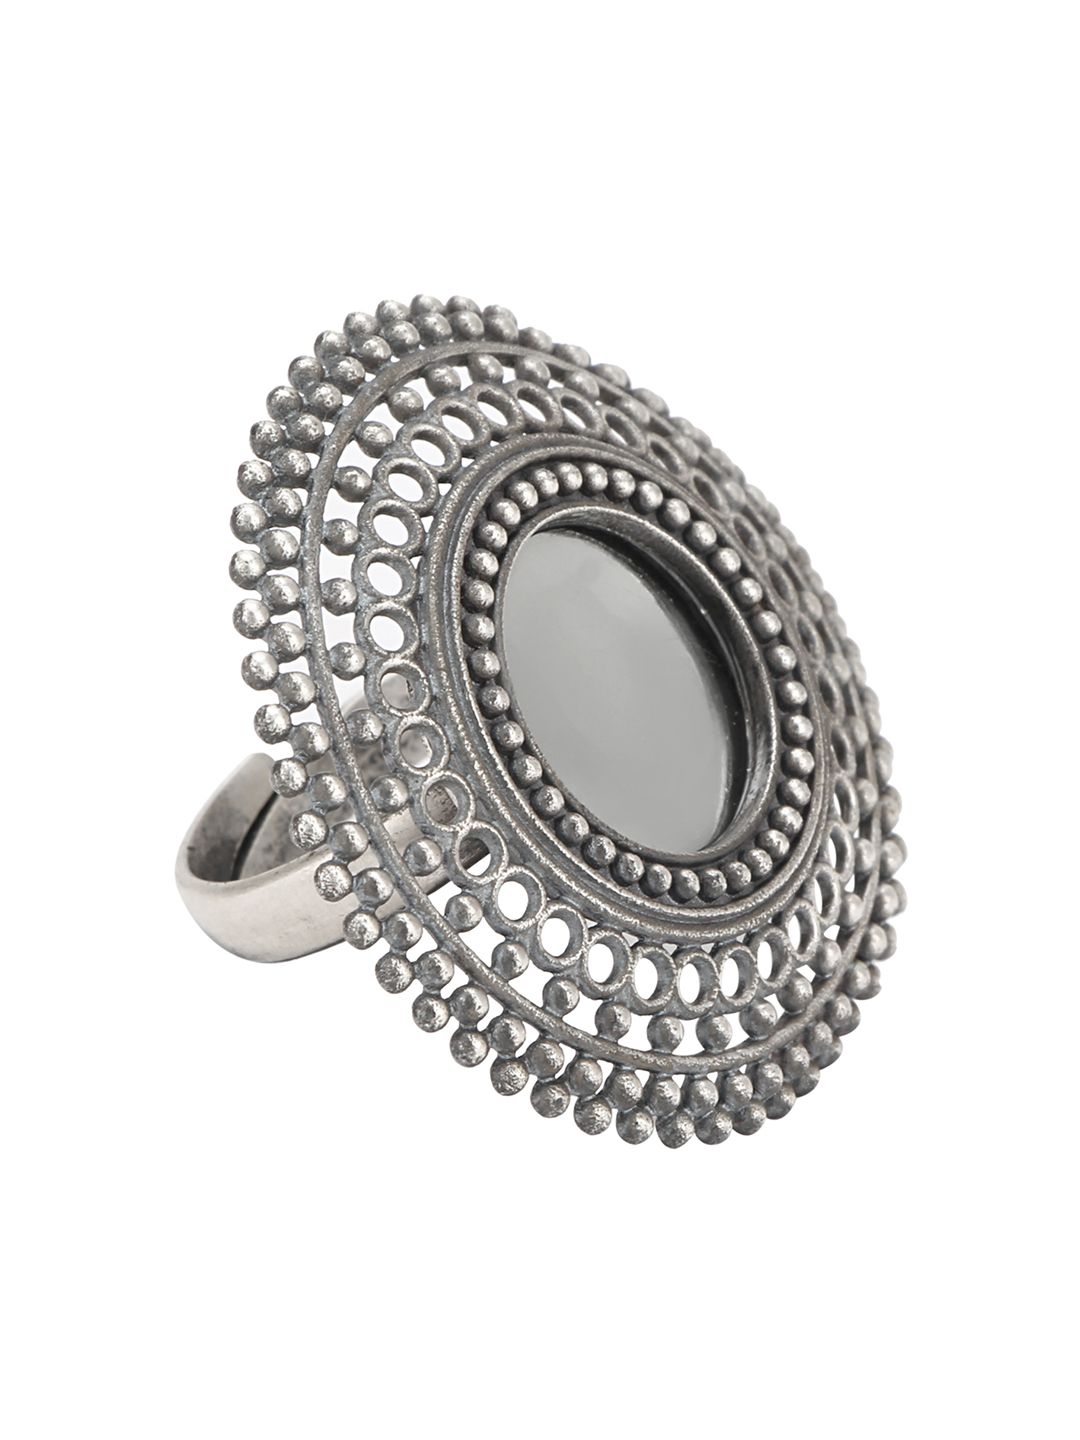 ahilya 92.5 Sterling Silver Adjustable Mirror Ring with Cut-Out Detail Price in India